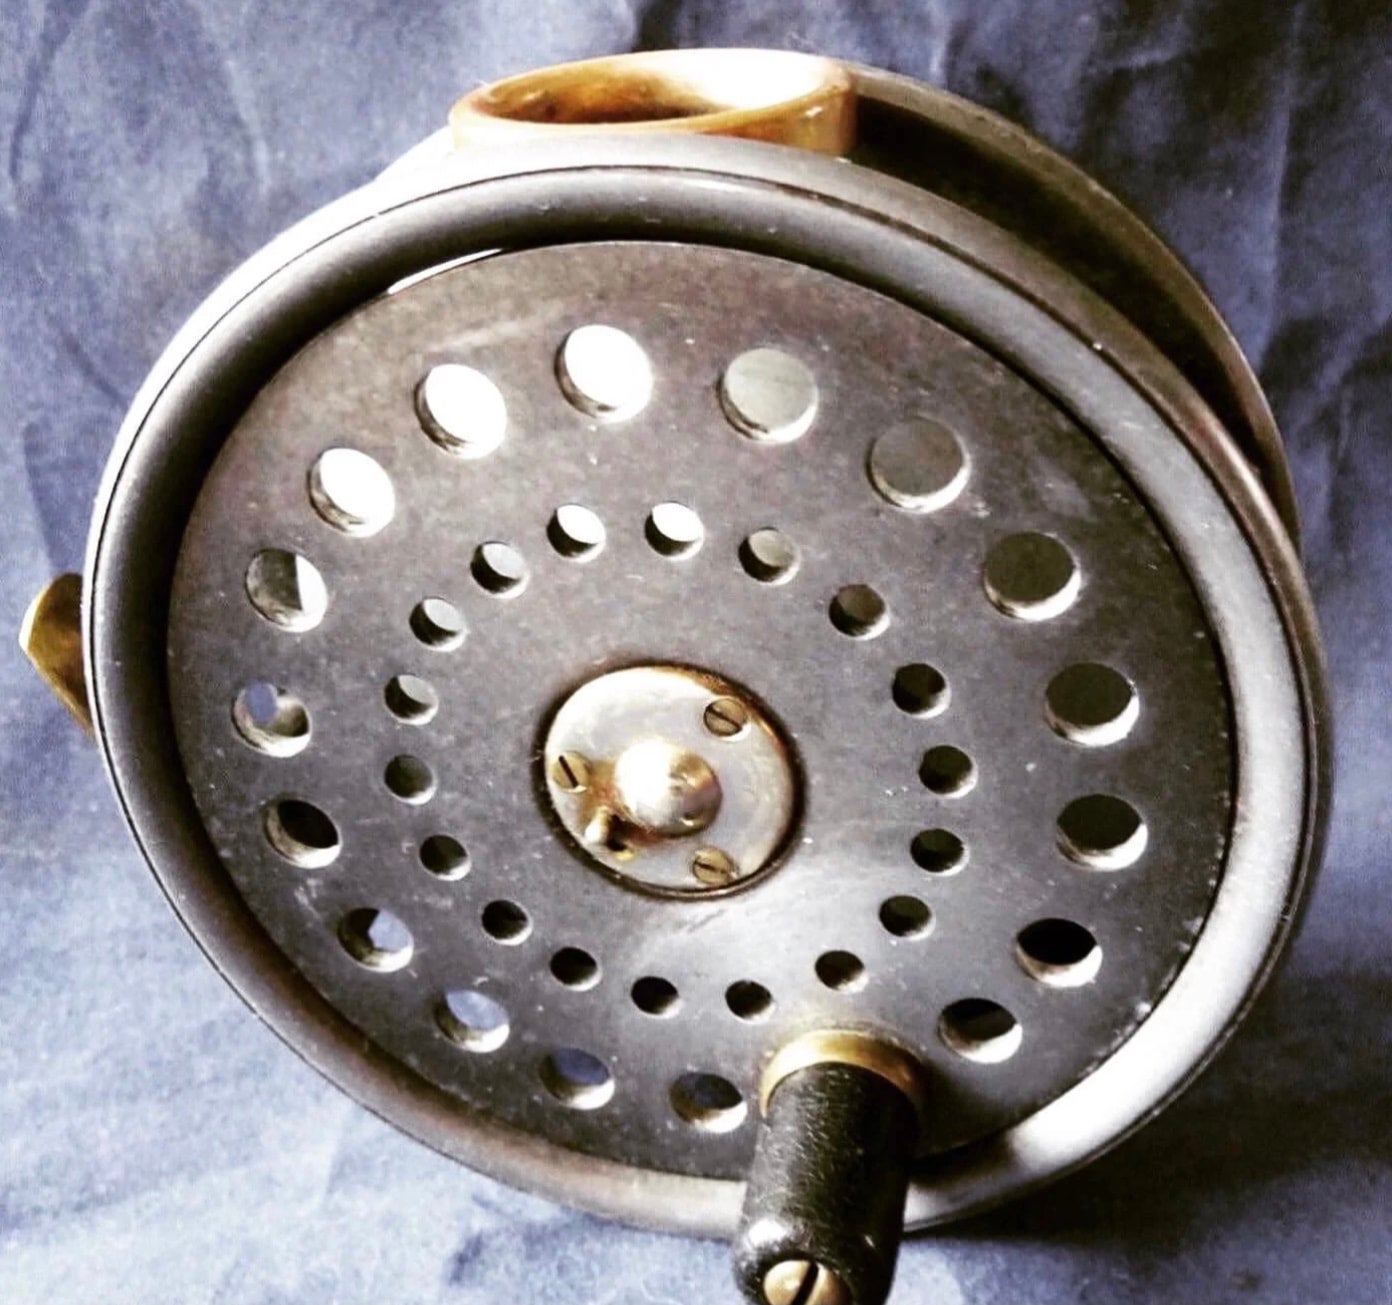 J W YOUNG “PRIDEX” 4″ SALMON FLY REEL – Vintage Fishing Tackle